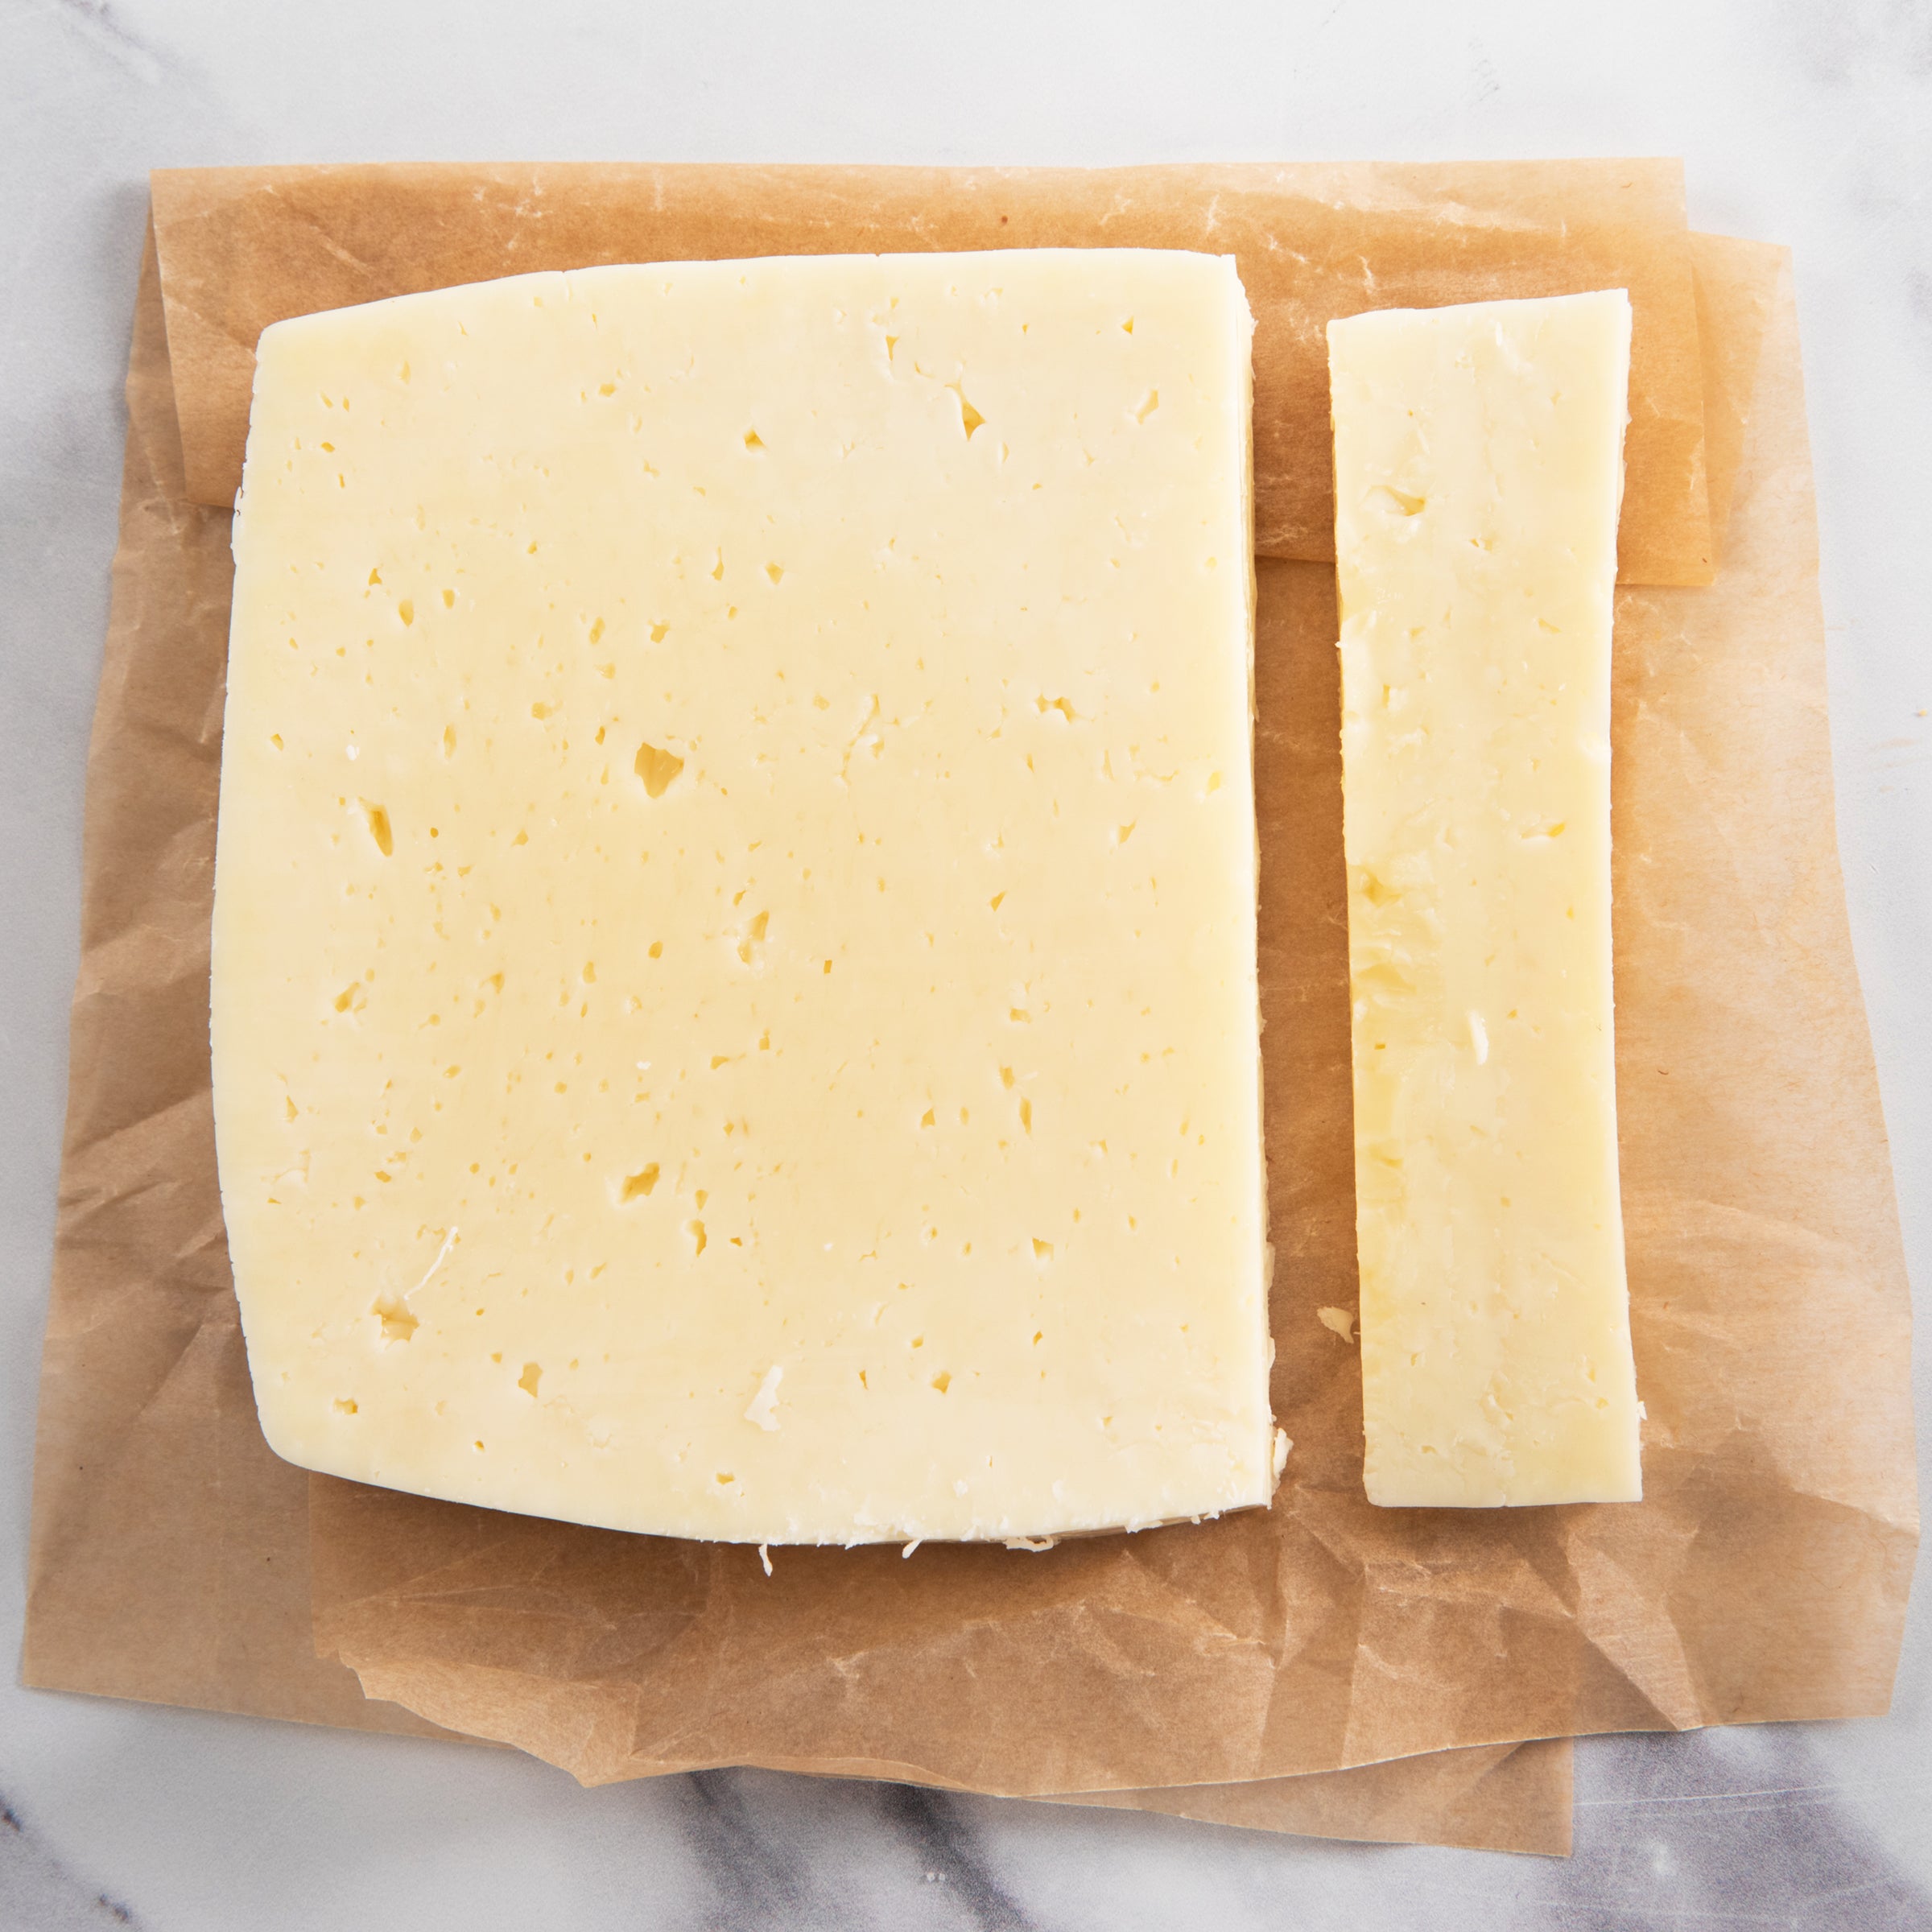 Bulk Cheese Blocks for Food Service and Co-Manufacturing